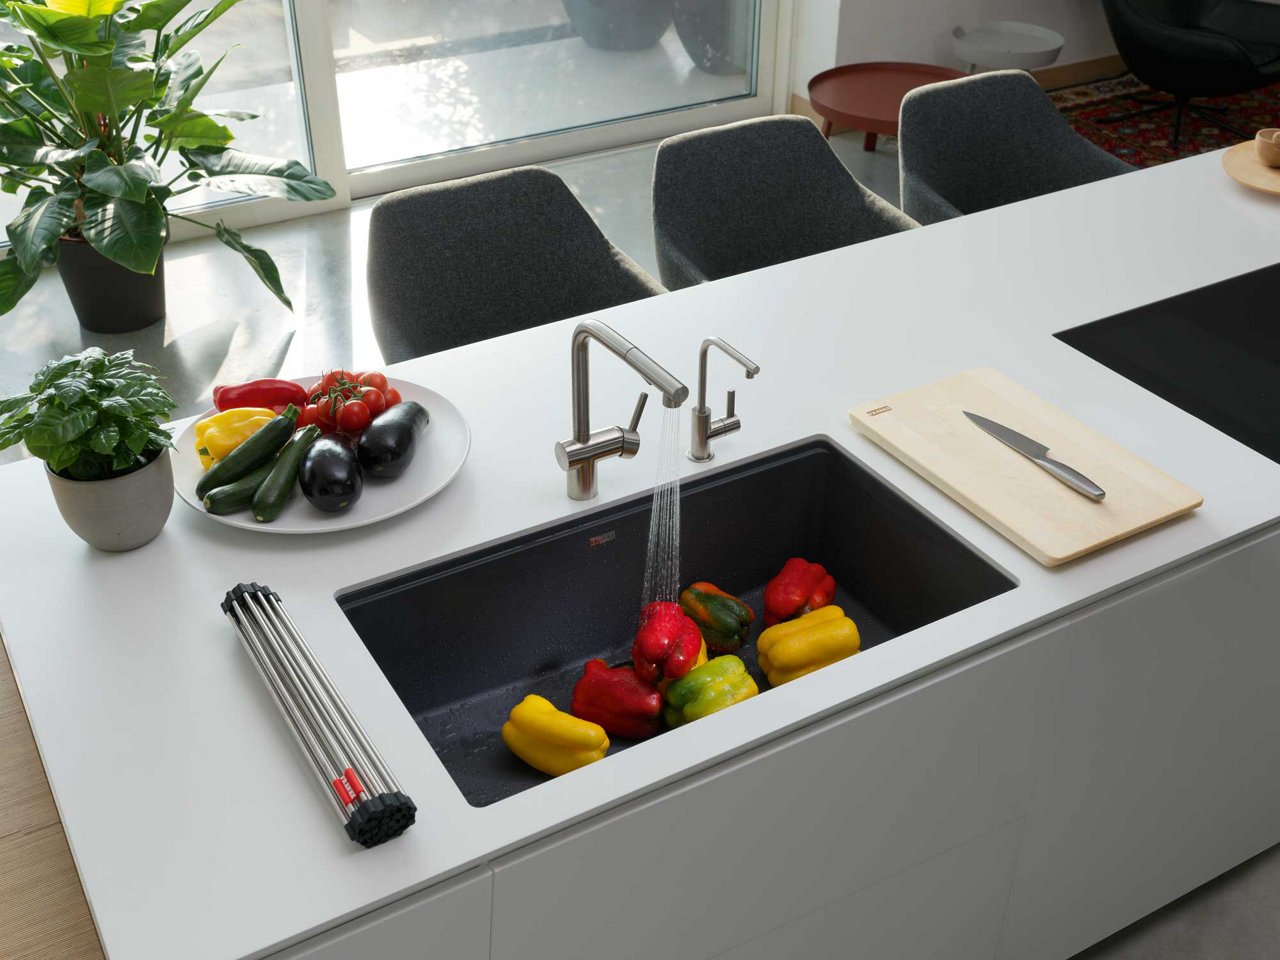 Vegetables being washed in a large undermount black kitchen sink